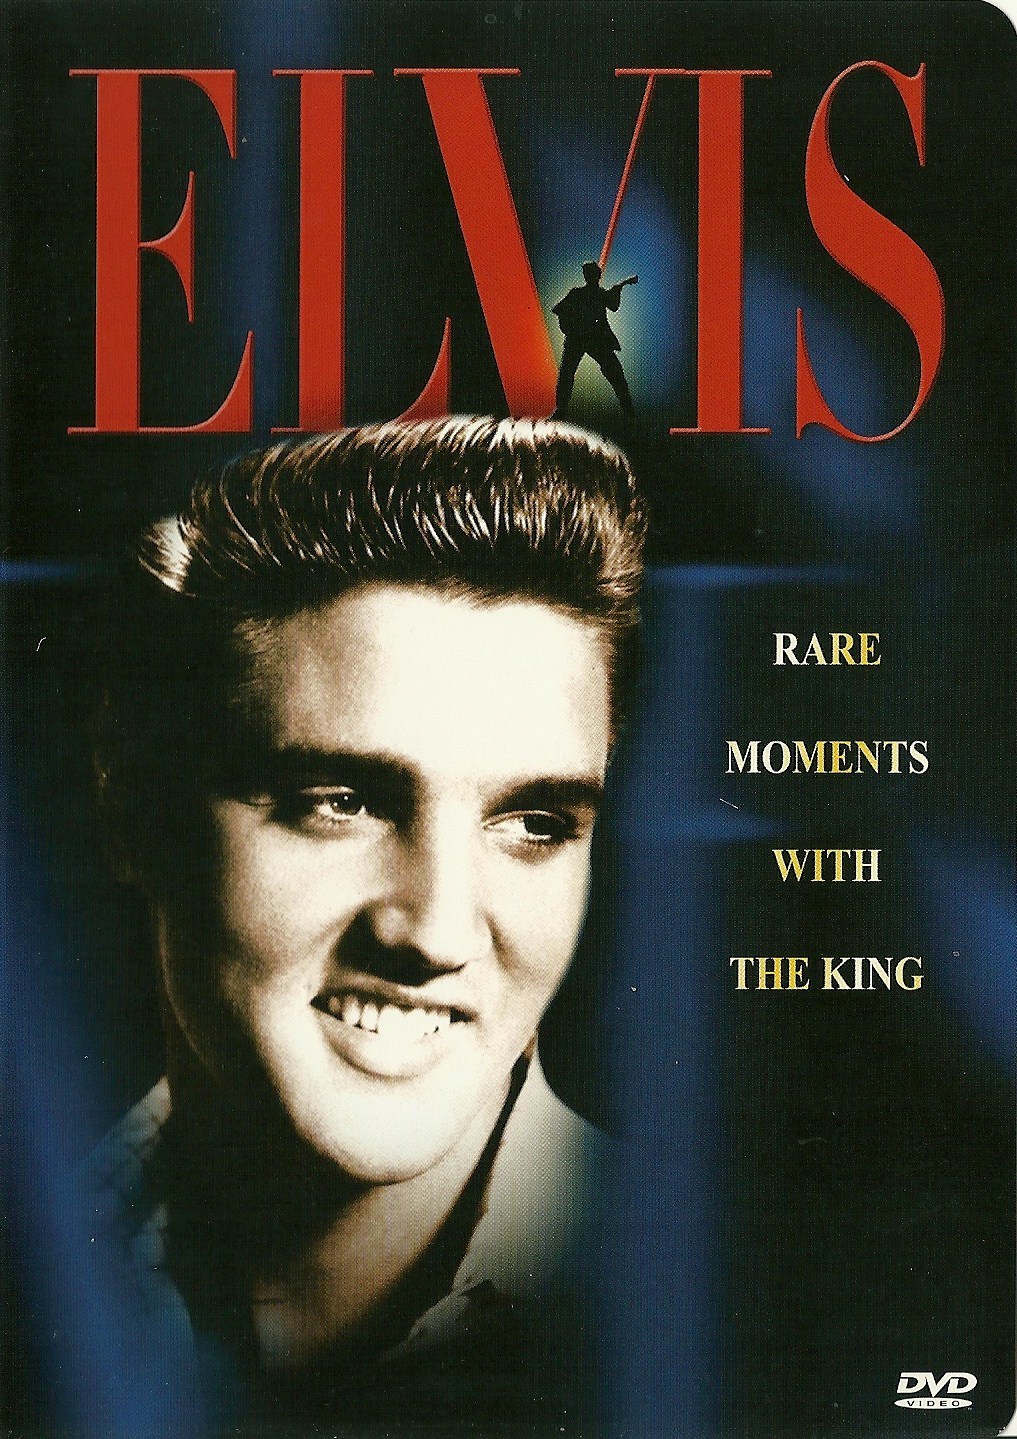 Elvis Rare Moments With The King DVD Documentary Elvis Presley - DVD